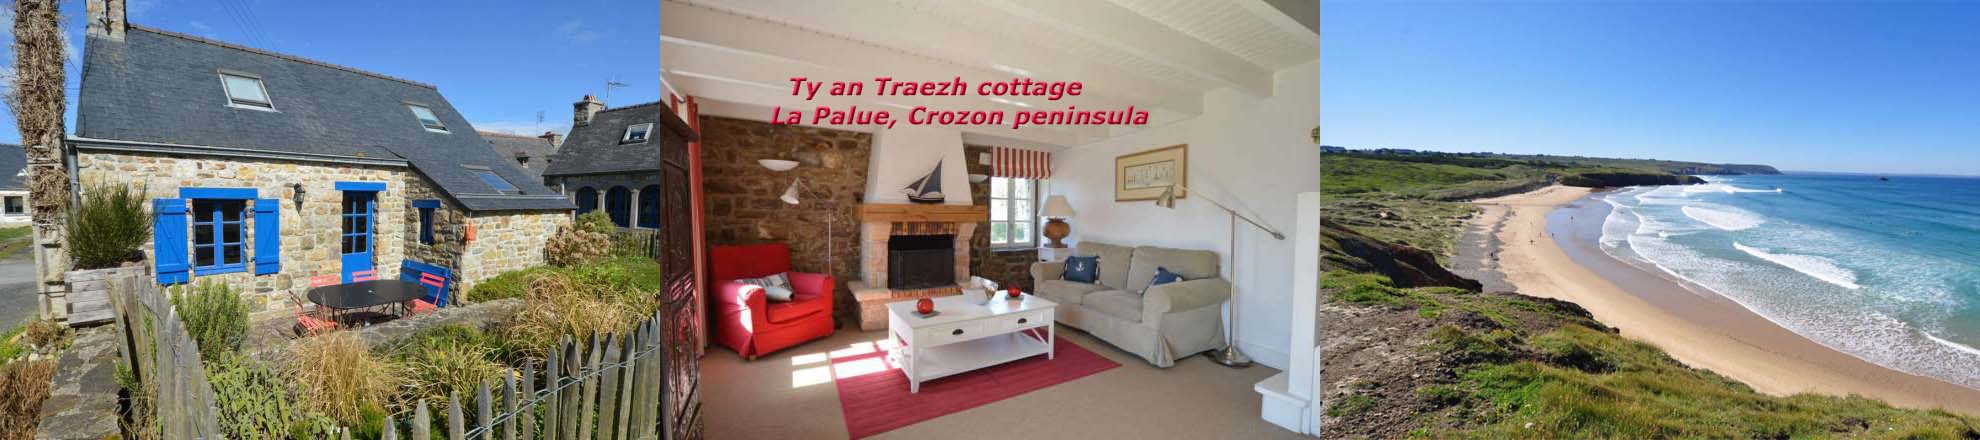 Brittany holiday home: Ty an Traezh cottage, near the la Palue beach